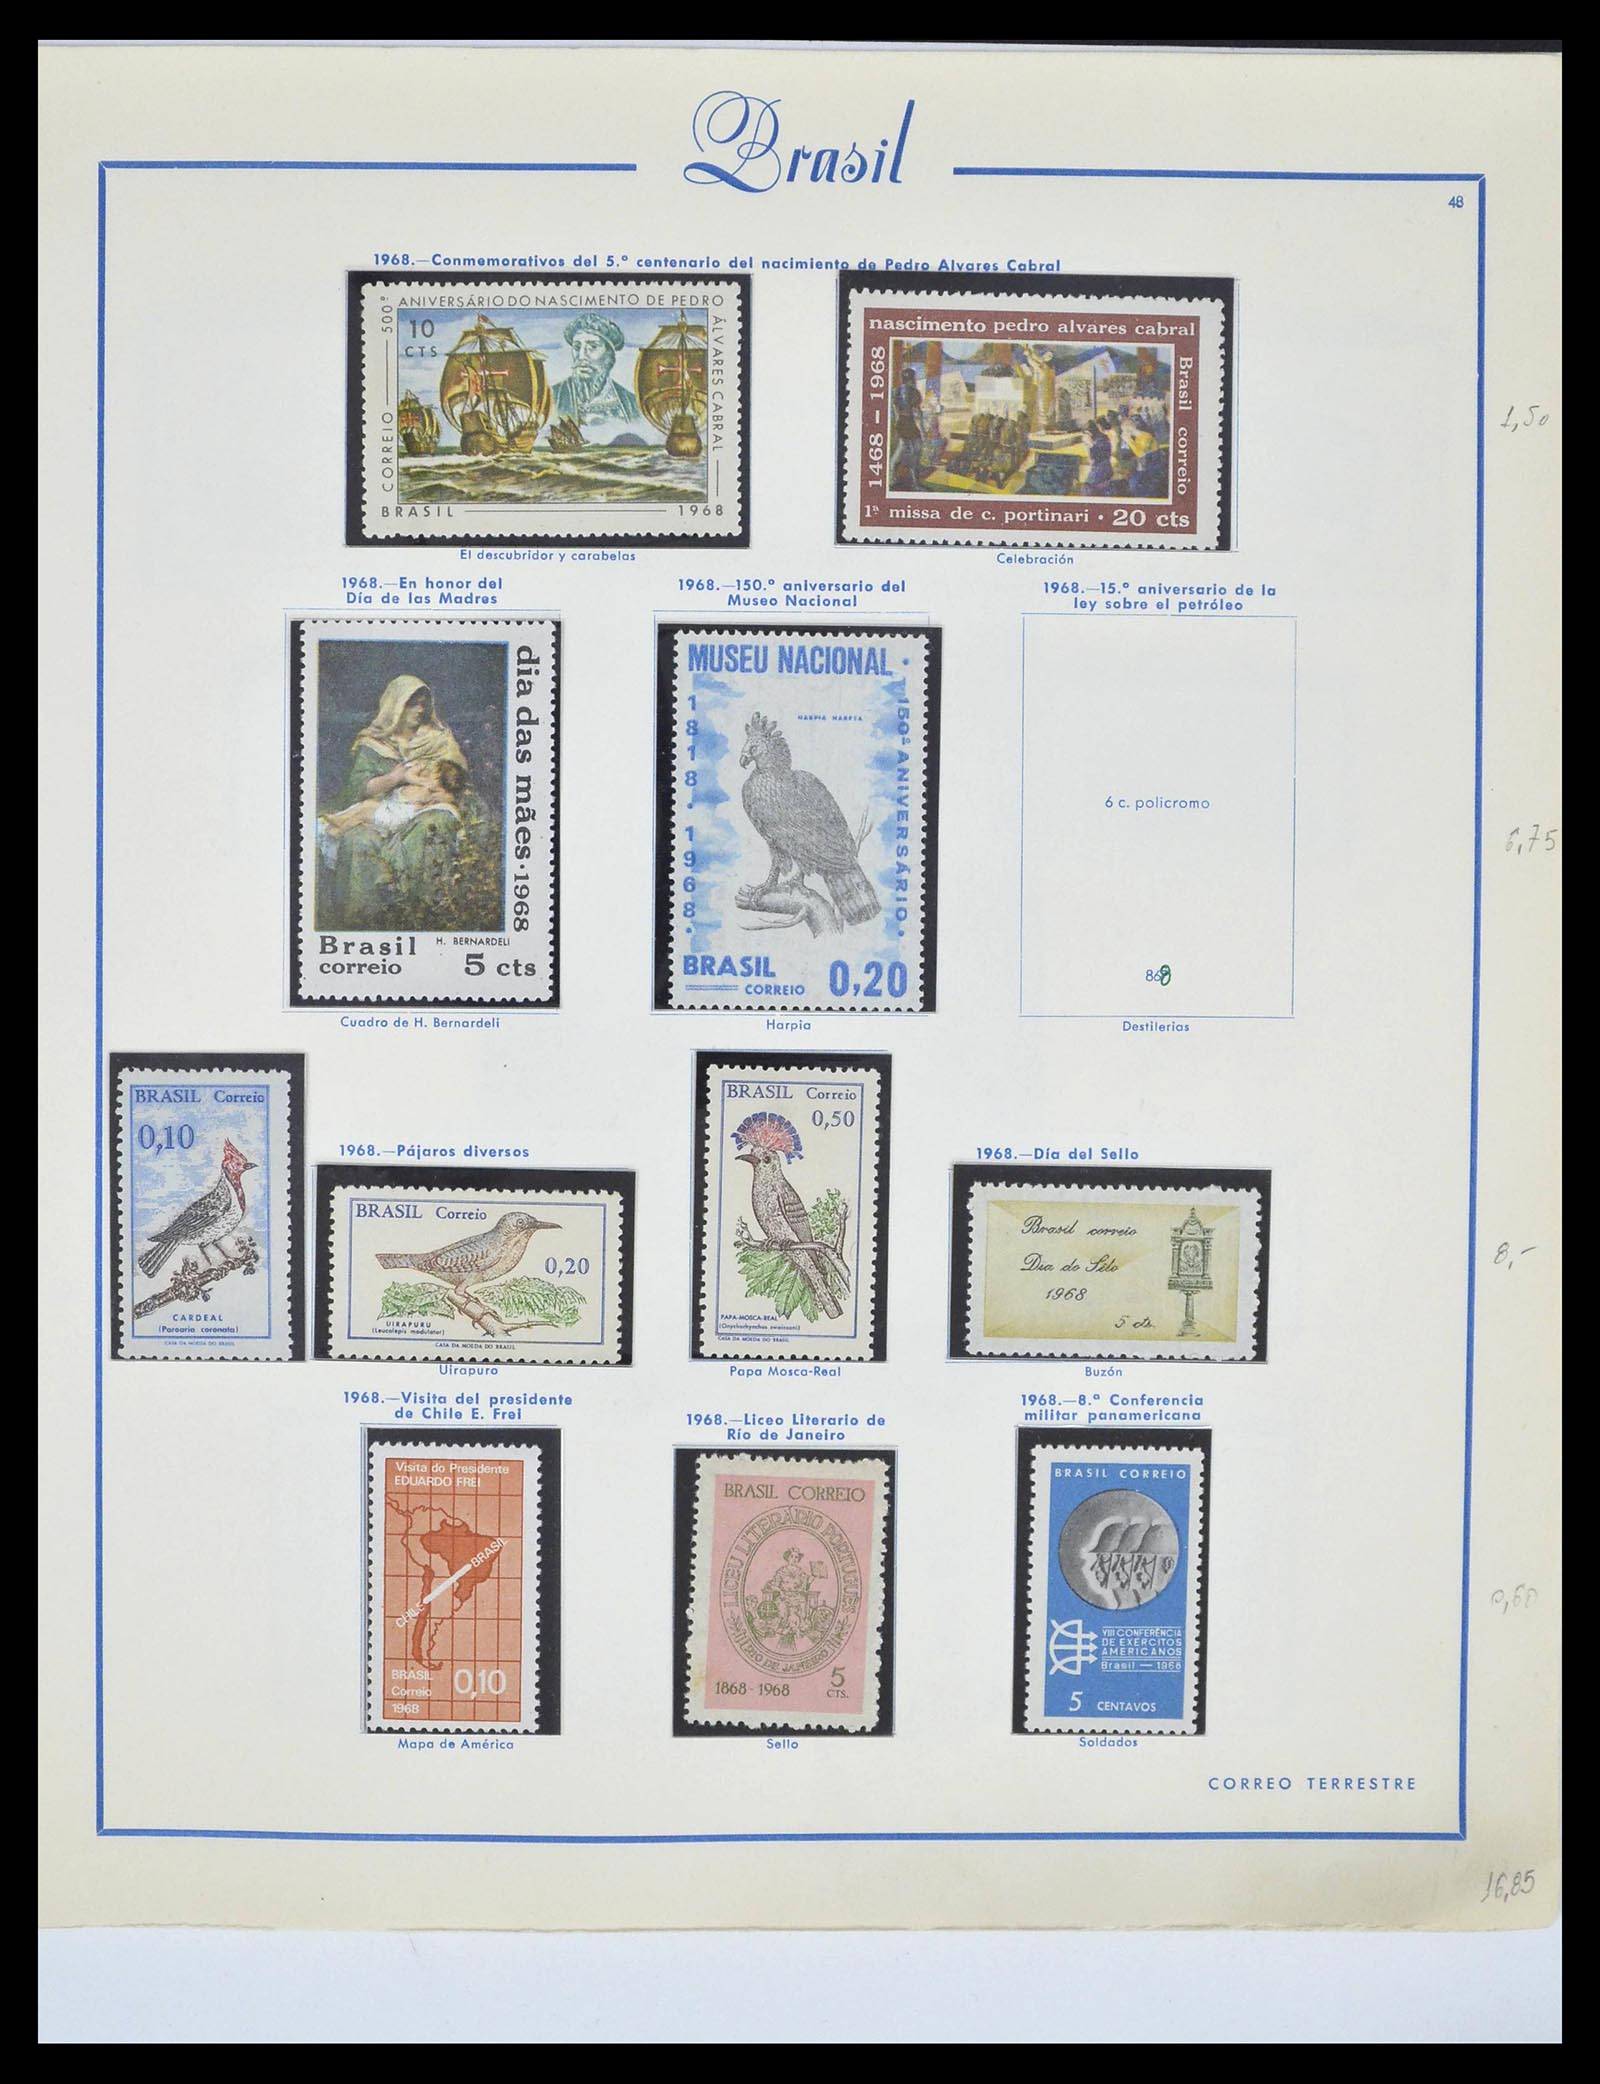 39245 0064 - Stamp collection 39245 Brazil 1843-1968.